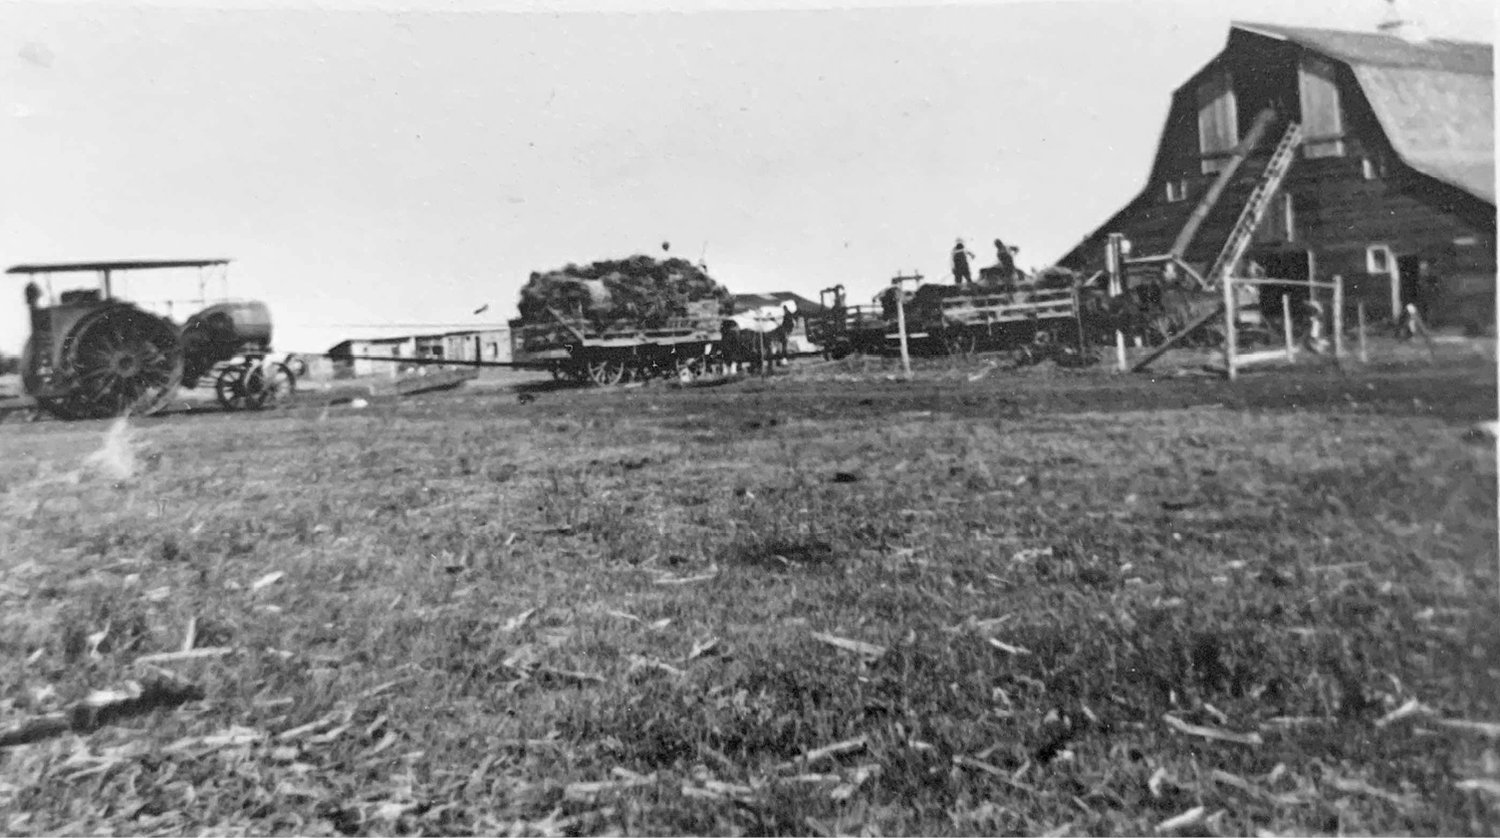 Pictured is the site of Sana in the 1880’s. This picture is of the Lorenz brothers threshing for Les Clendening. They were blowing straw into the haymow and elevating grain into the barn at the same time. The tractor is a Twin Cities Tractor. Picture taken in 1927-1928.